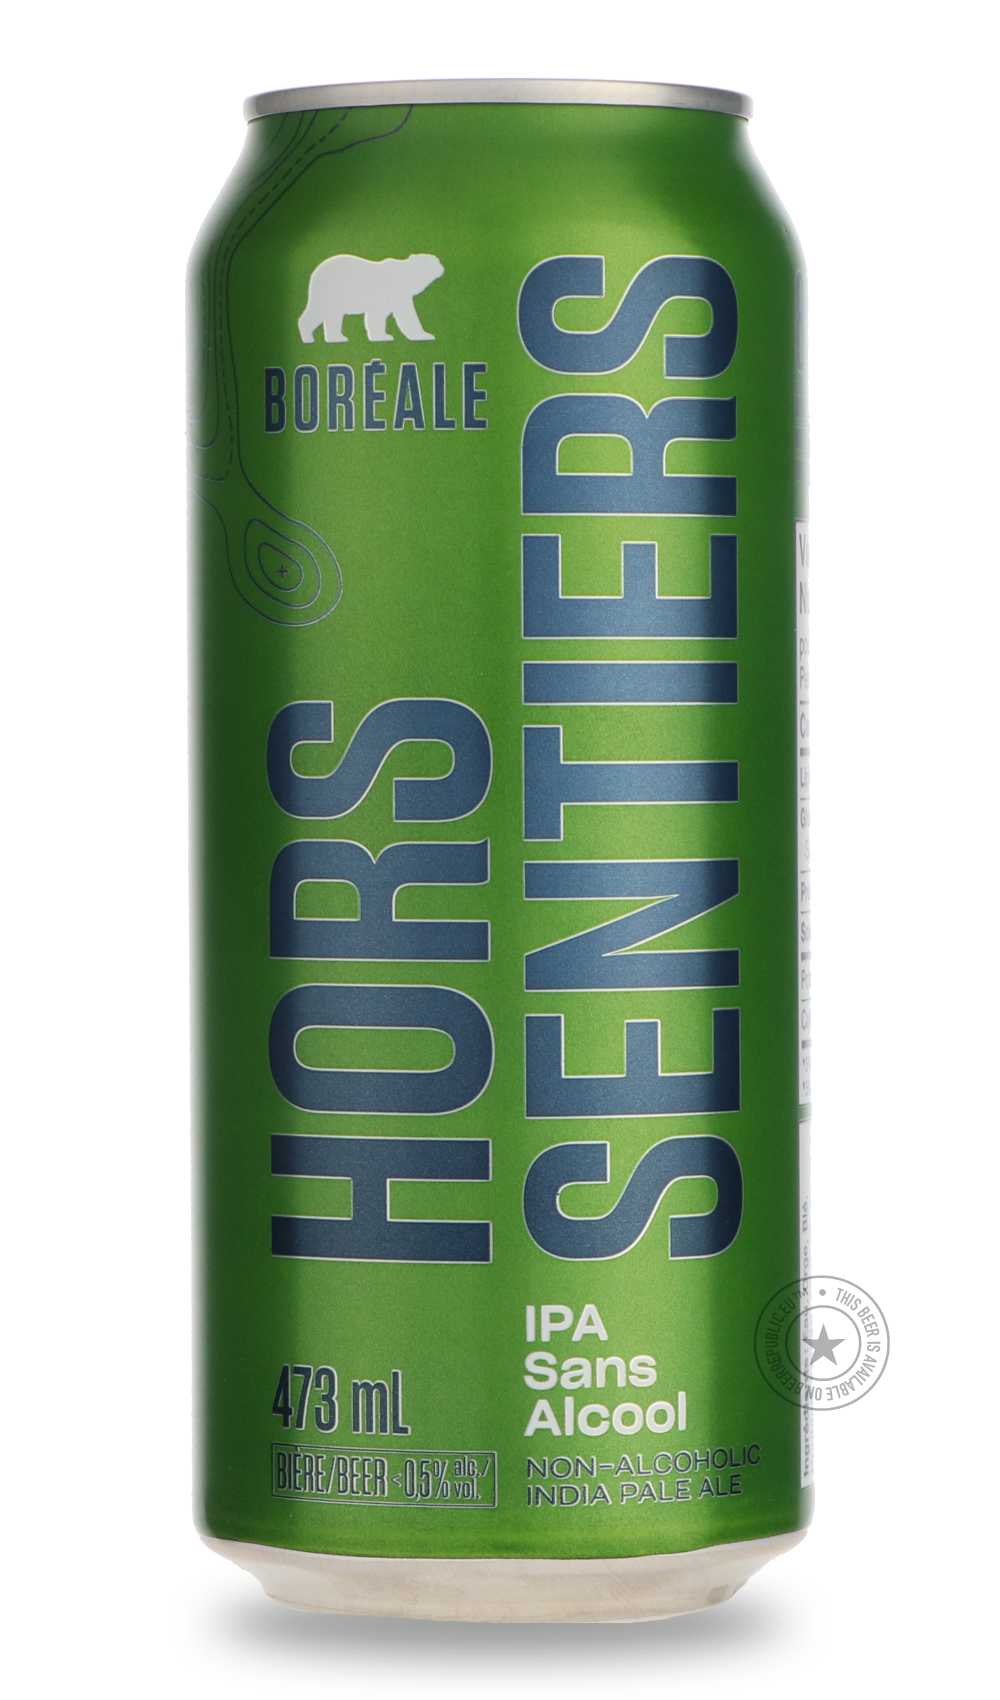 -Boréale- Hors Sentiers - IPA Sans Alcool-IPA- Only @ Beer Republic - The best online beer store for American & Canadian craft beer - Buy beer online from the USA and Canada - Bier online kopen - Amerikaans bier kopen - Craft beer store - Craft beer kopen - Amerikanisch bier kaufen - Bier online kaufen - Acheter biere online - IPA - Stout - Porter - New England IPA - Hazy IPA - Imperial Stout - Barrel Aged - Barrel Aged Imperial Stout - Brown - Dark beer - Blond - Blonde - Pilsner - Lager - Wheat - Weizen -